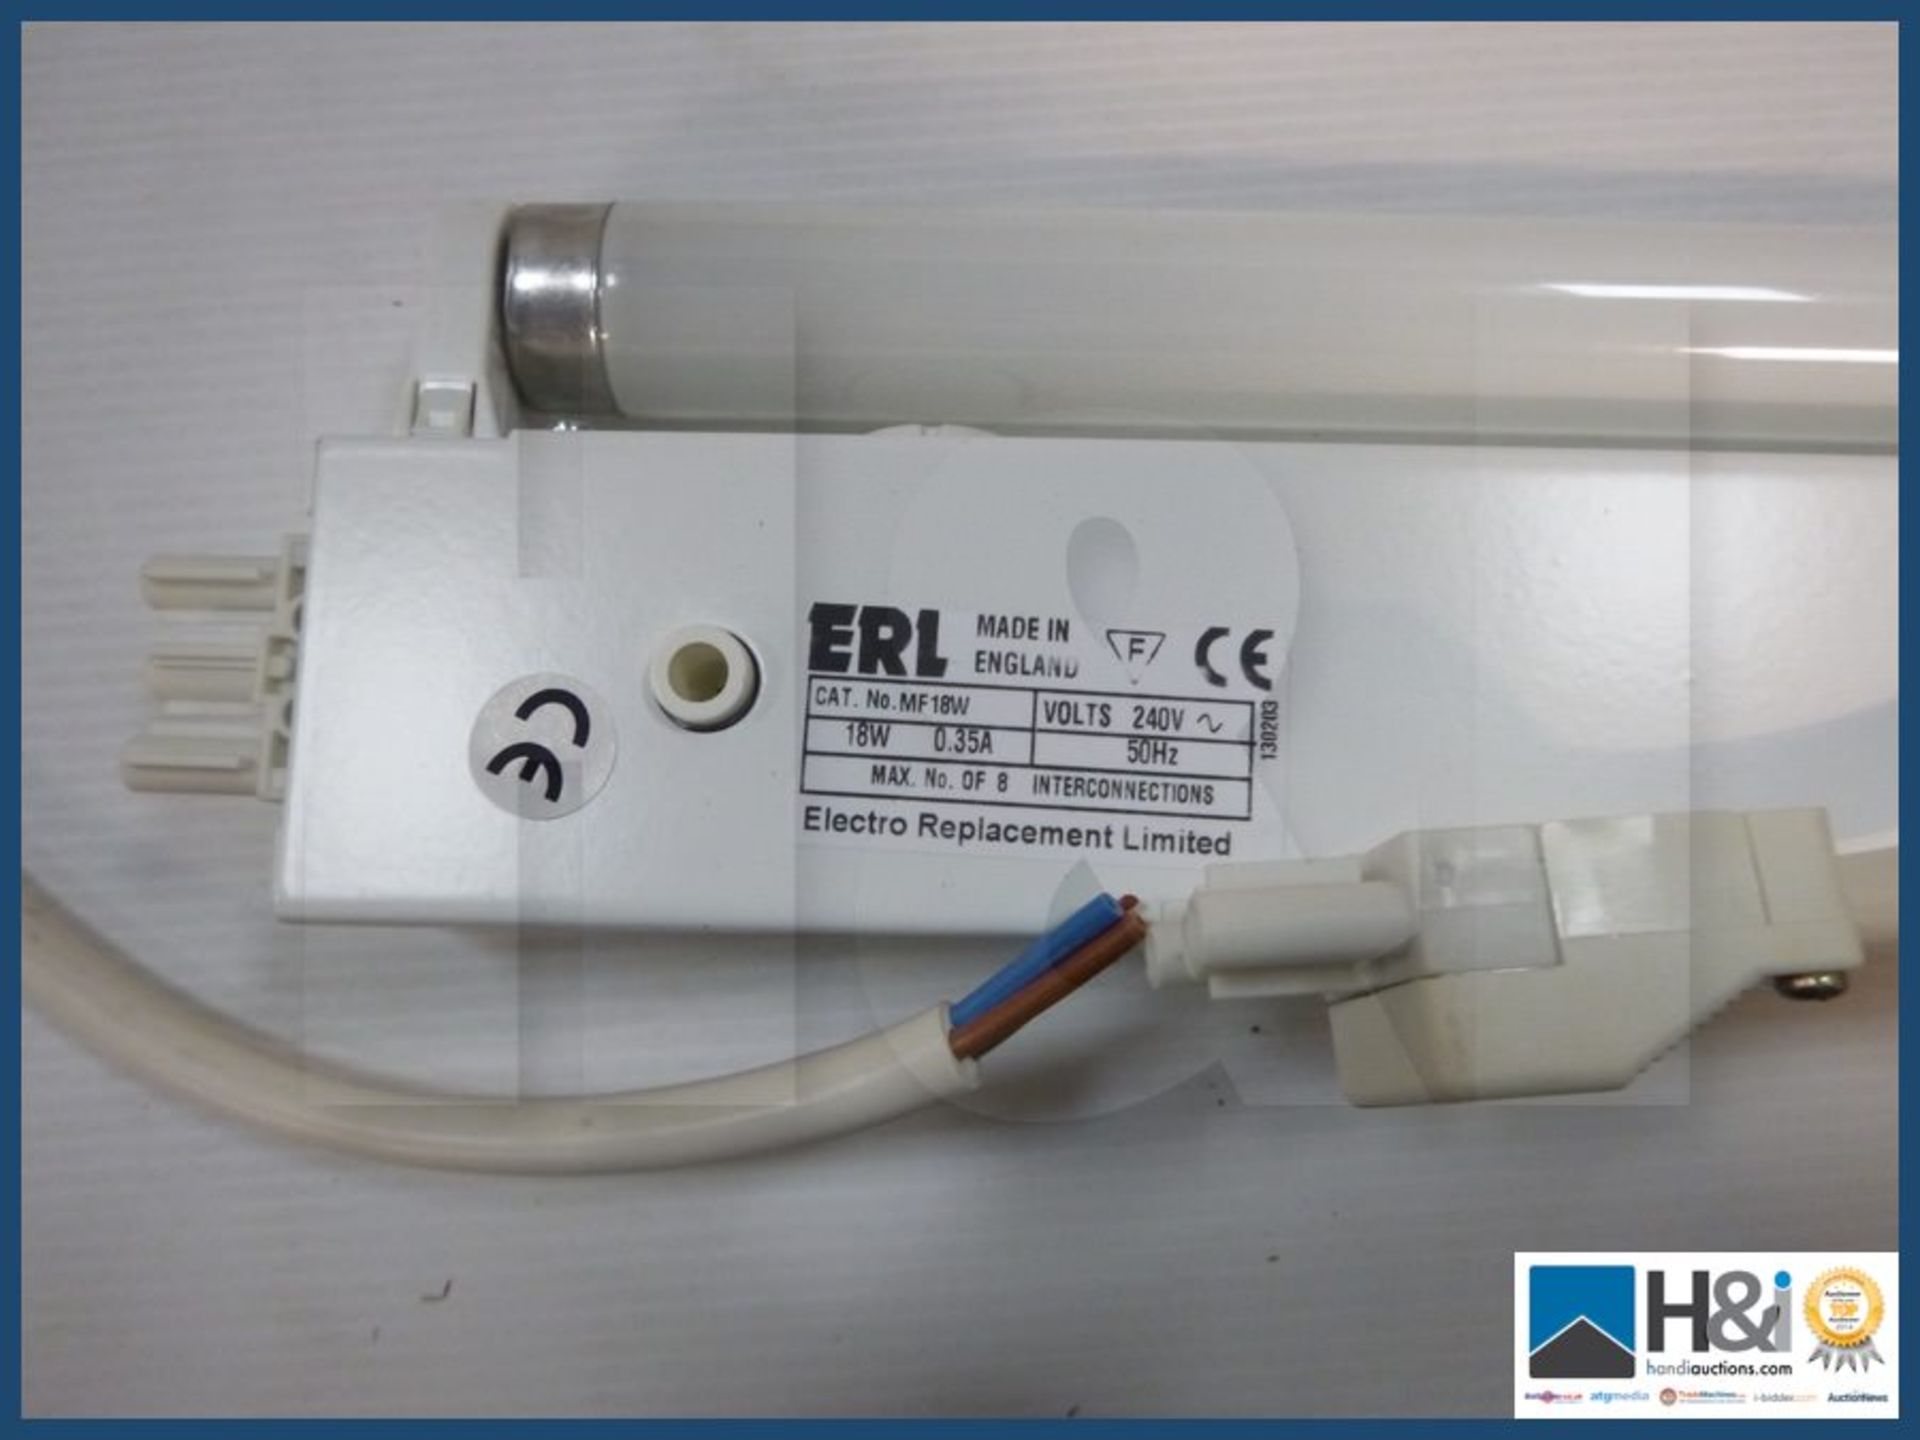 X1 Modular Fluorescent fitting 240Volt 50Hz 18W With mains lead - Image 2 of 2